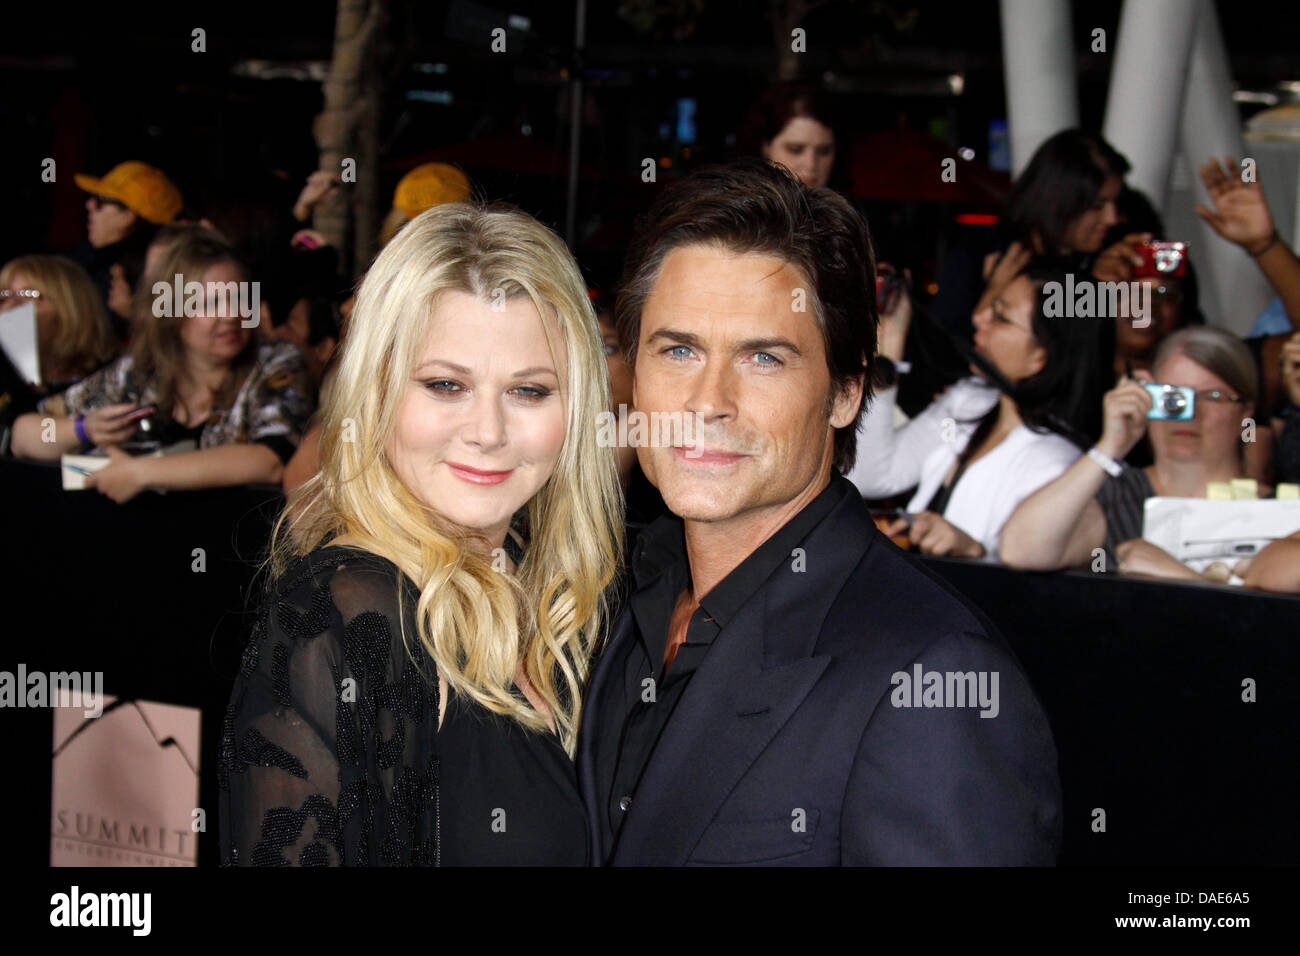 US actor Rob Lowe and his wife Sheryl Berkoff arrive for the World Premiere of 'The Twilight Saga: Breaking Dawn - Part 1' at Nokia Theatre at L.A. Live in Los Angeles, USA, 15 November 2011. Photo: Hubert Boesl Stock Photo